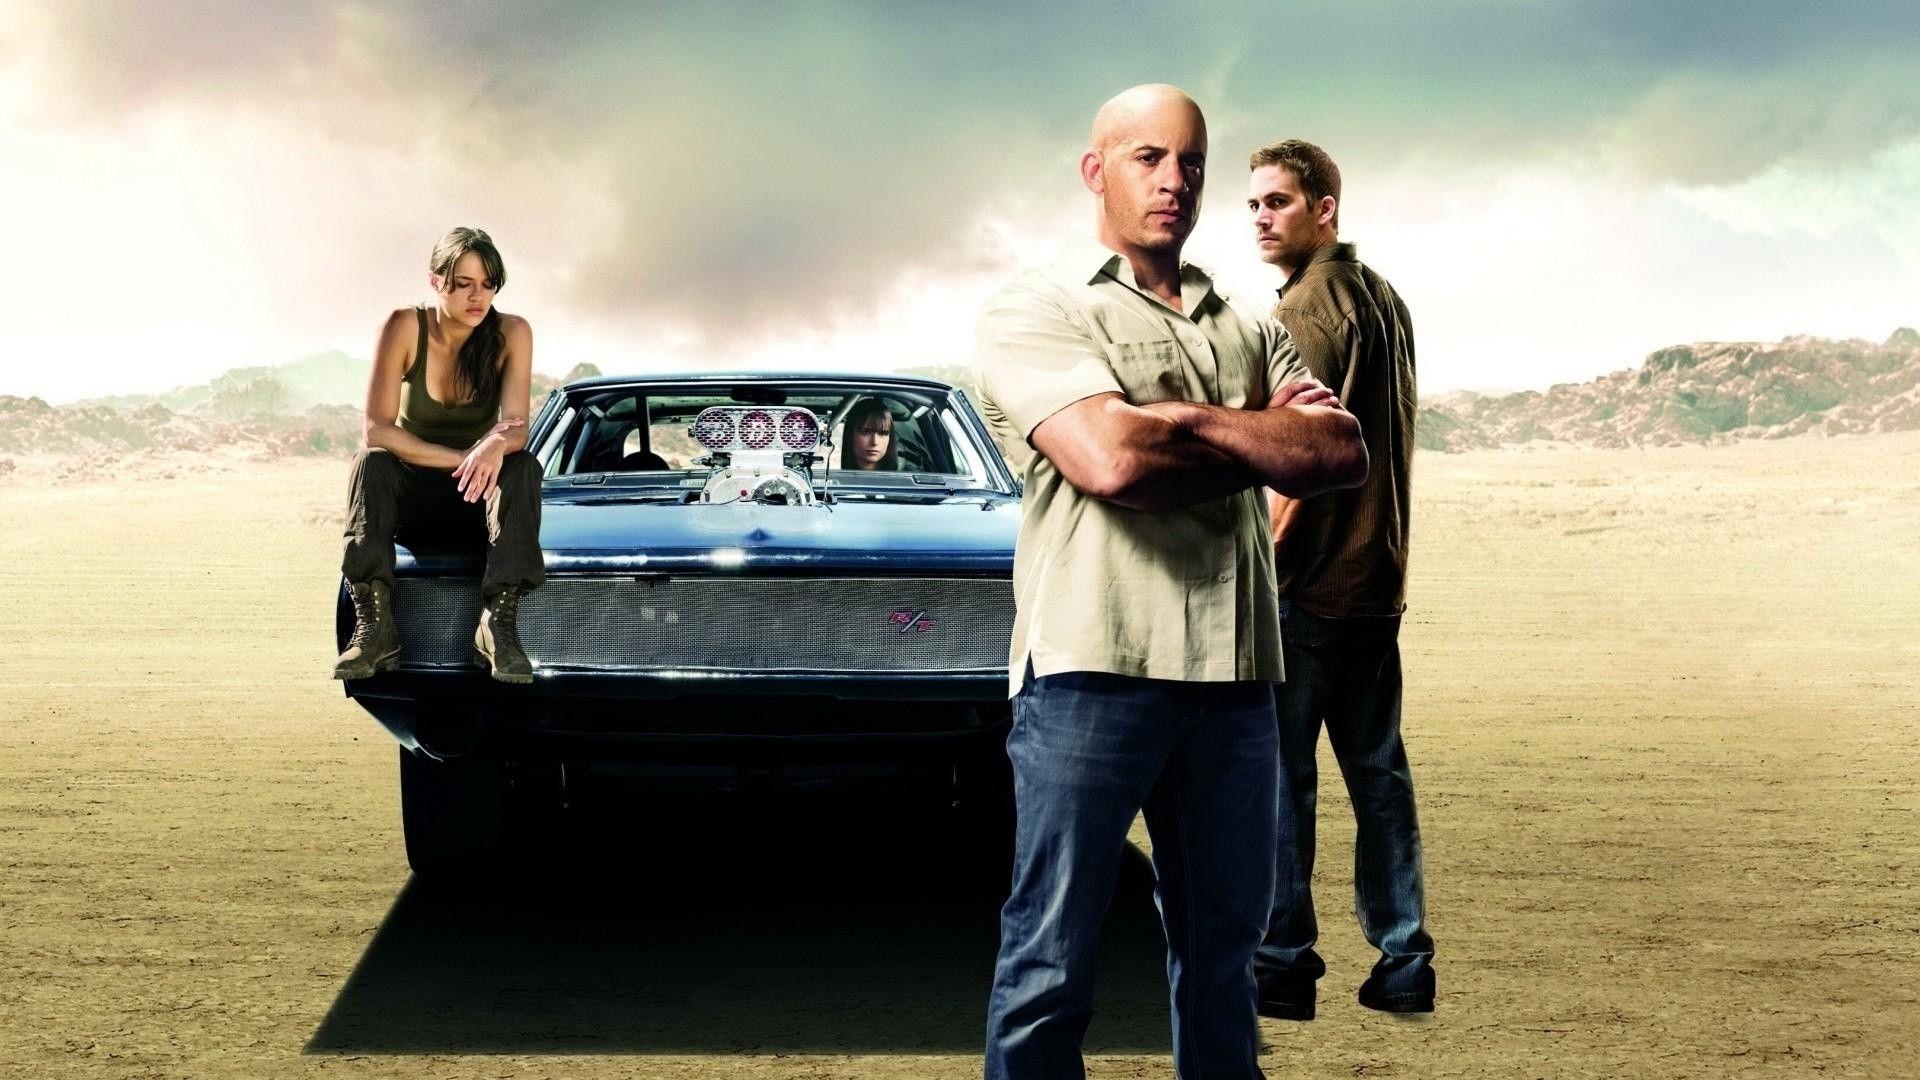 Fast and Furious HD Wallpaper 1080p Movies. HD Wallpaper Source